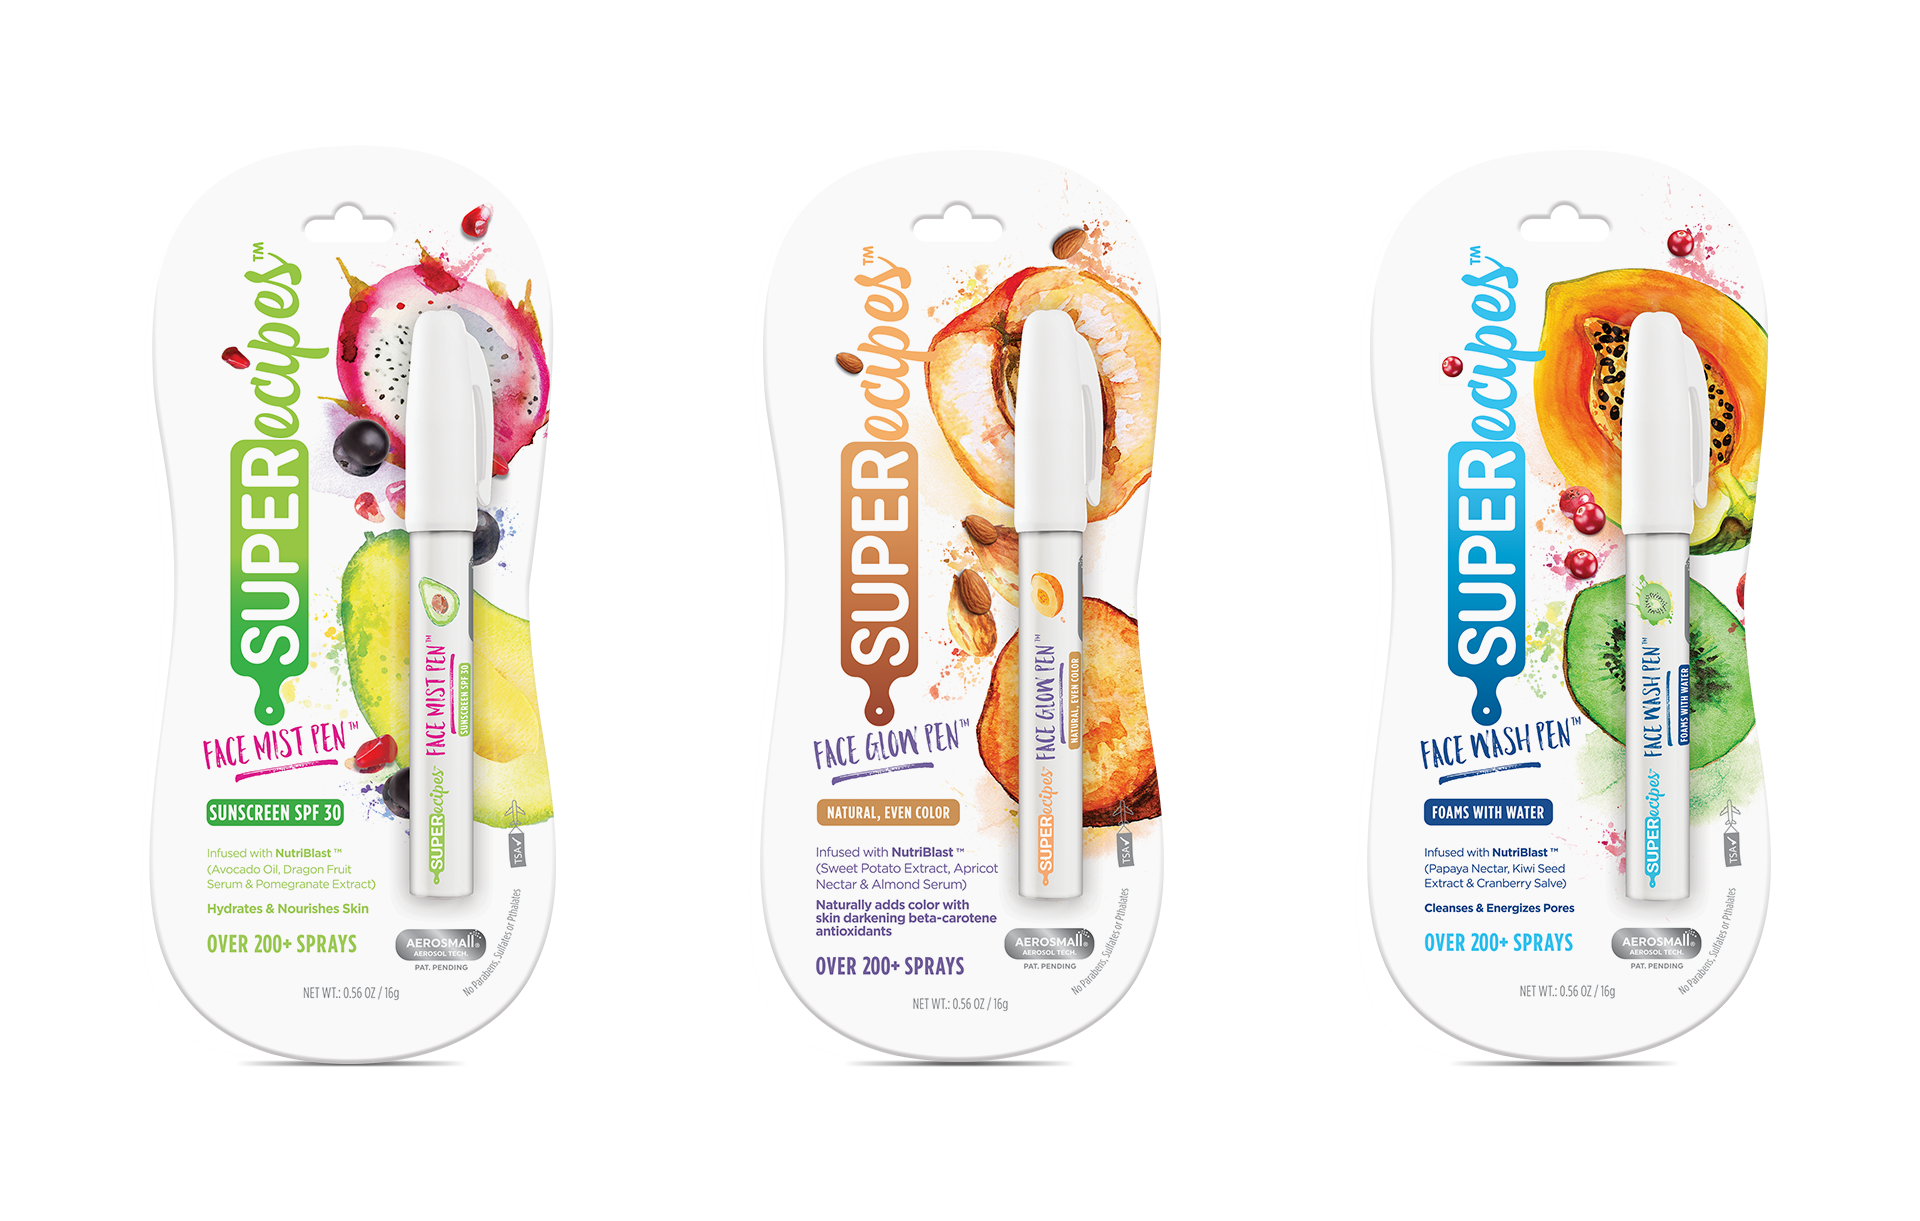 Superecipes Packaging Design by Creatibly's Scott Luscombe